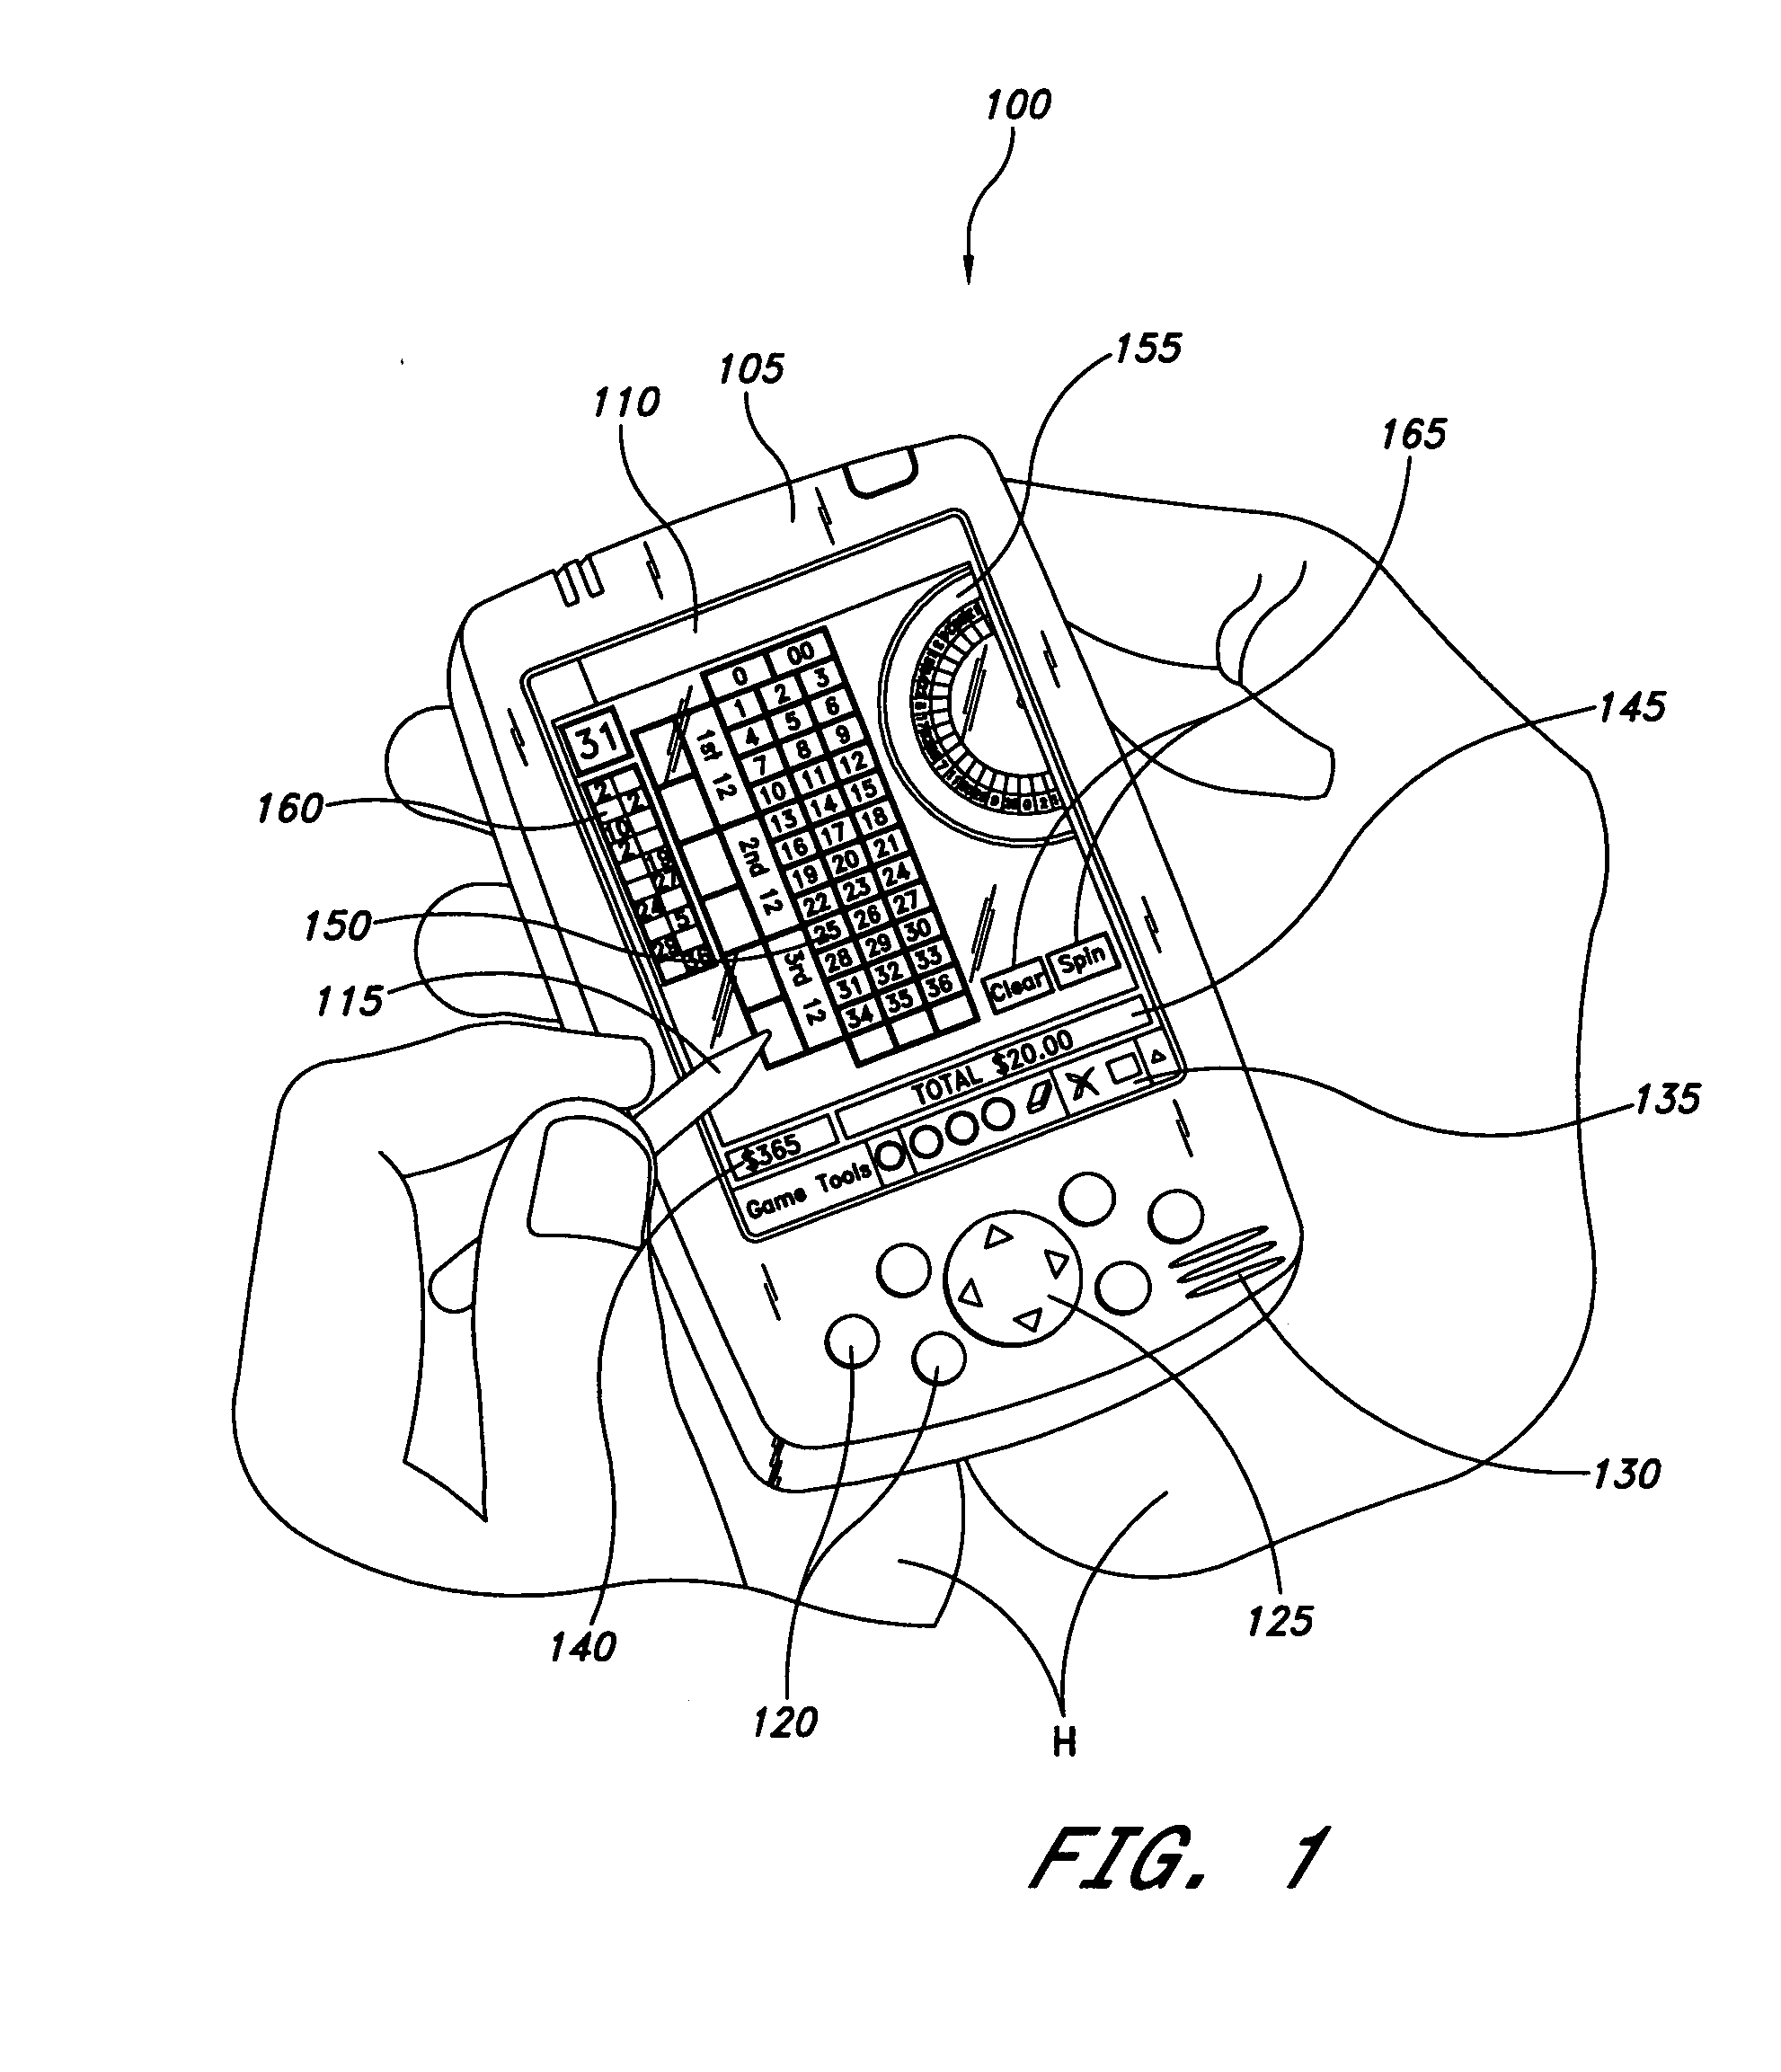 Method and apparatus for operating a mobile gaming system